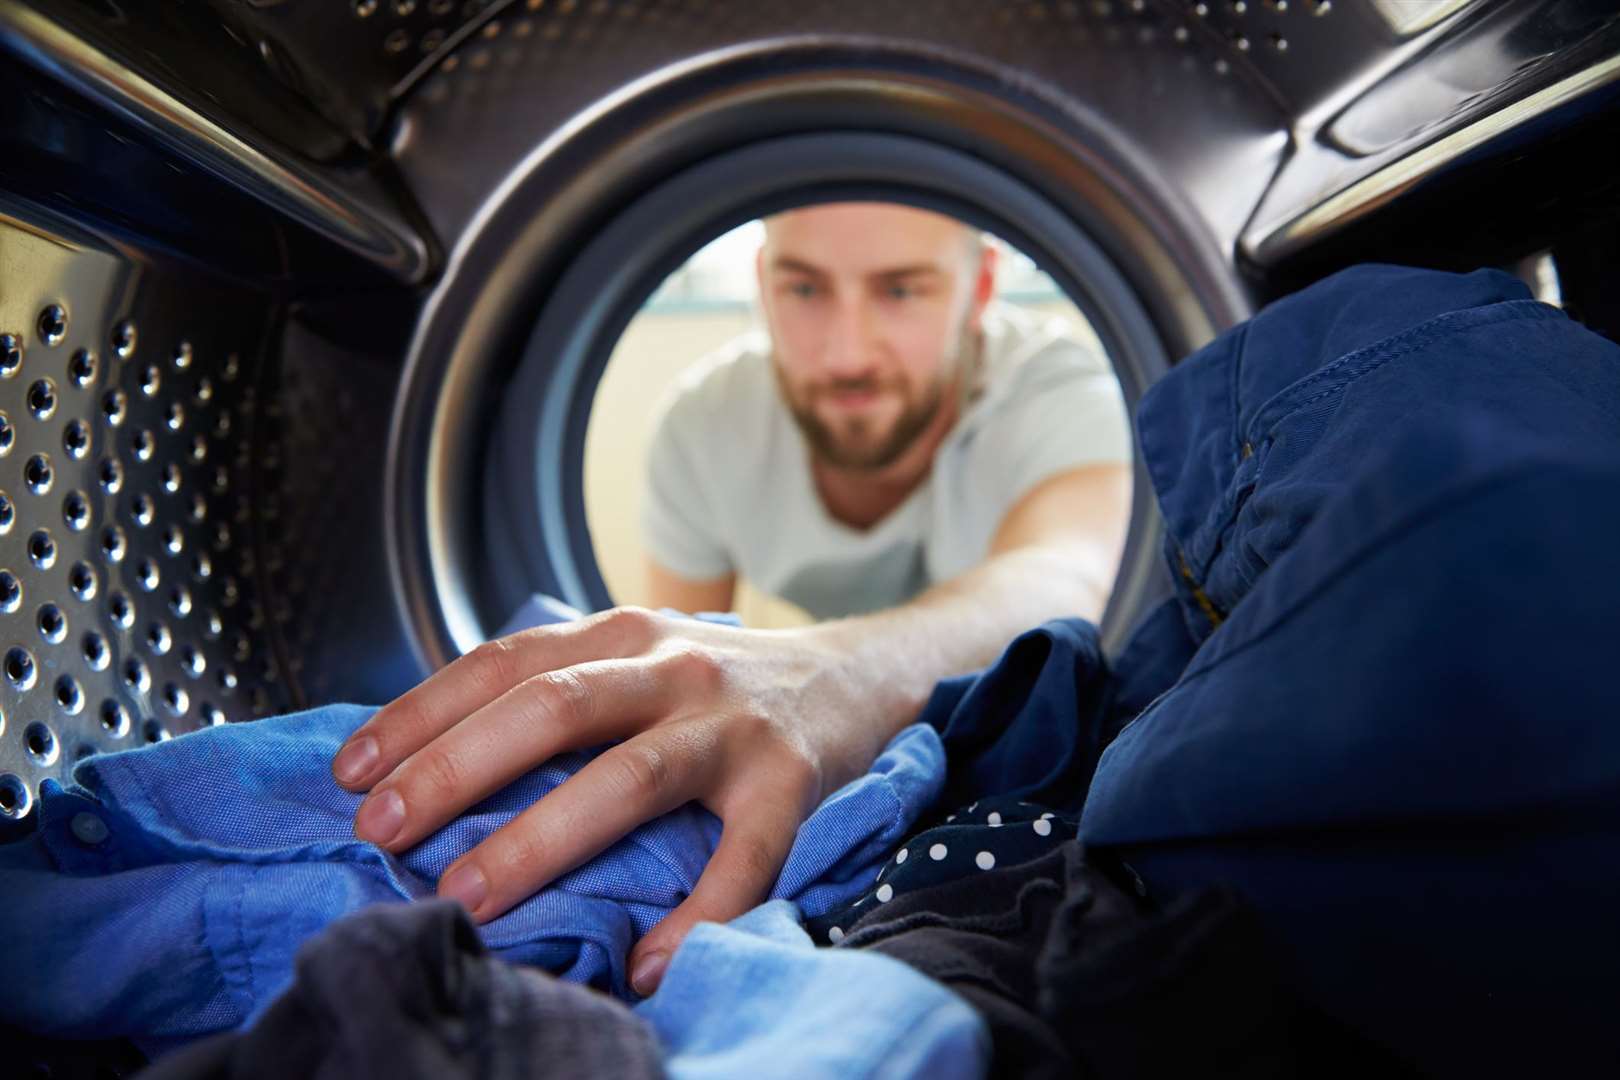 Allergy experts suggest washing clothes and pillowcases regularly